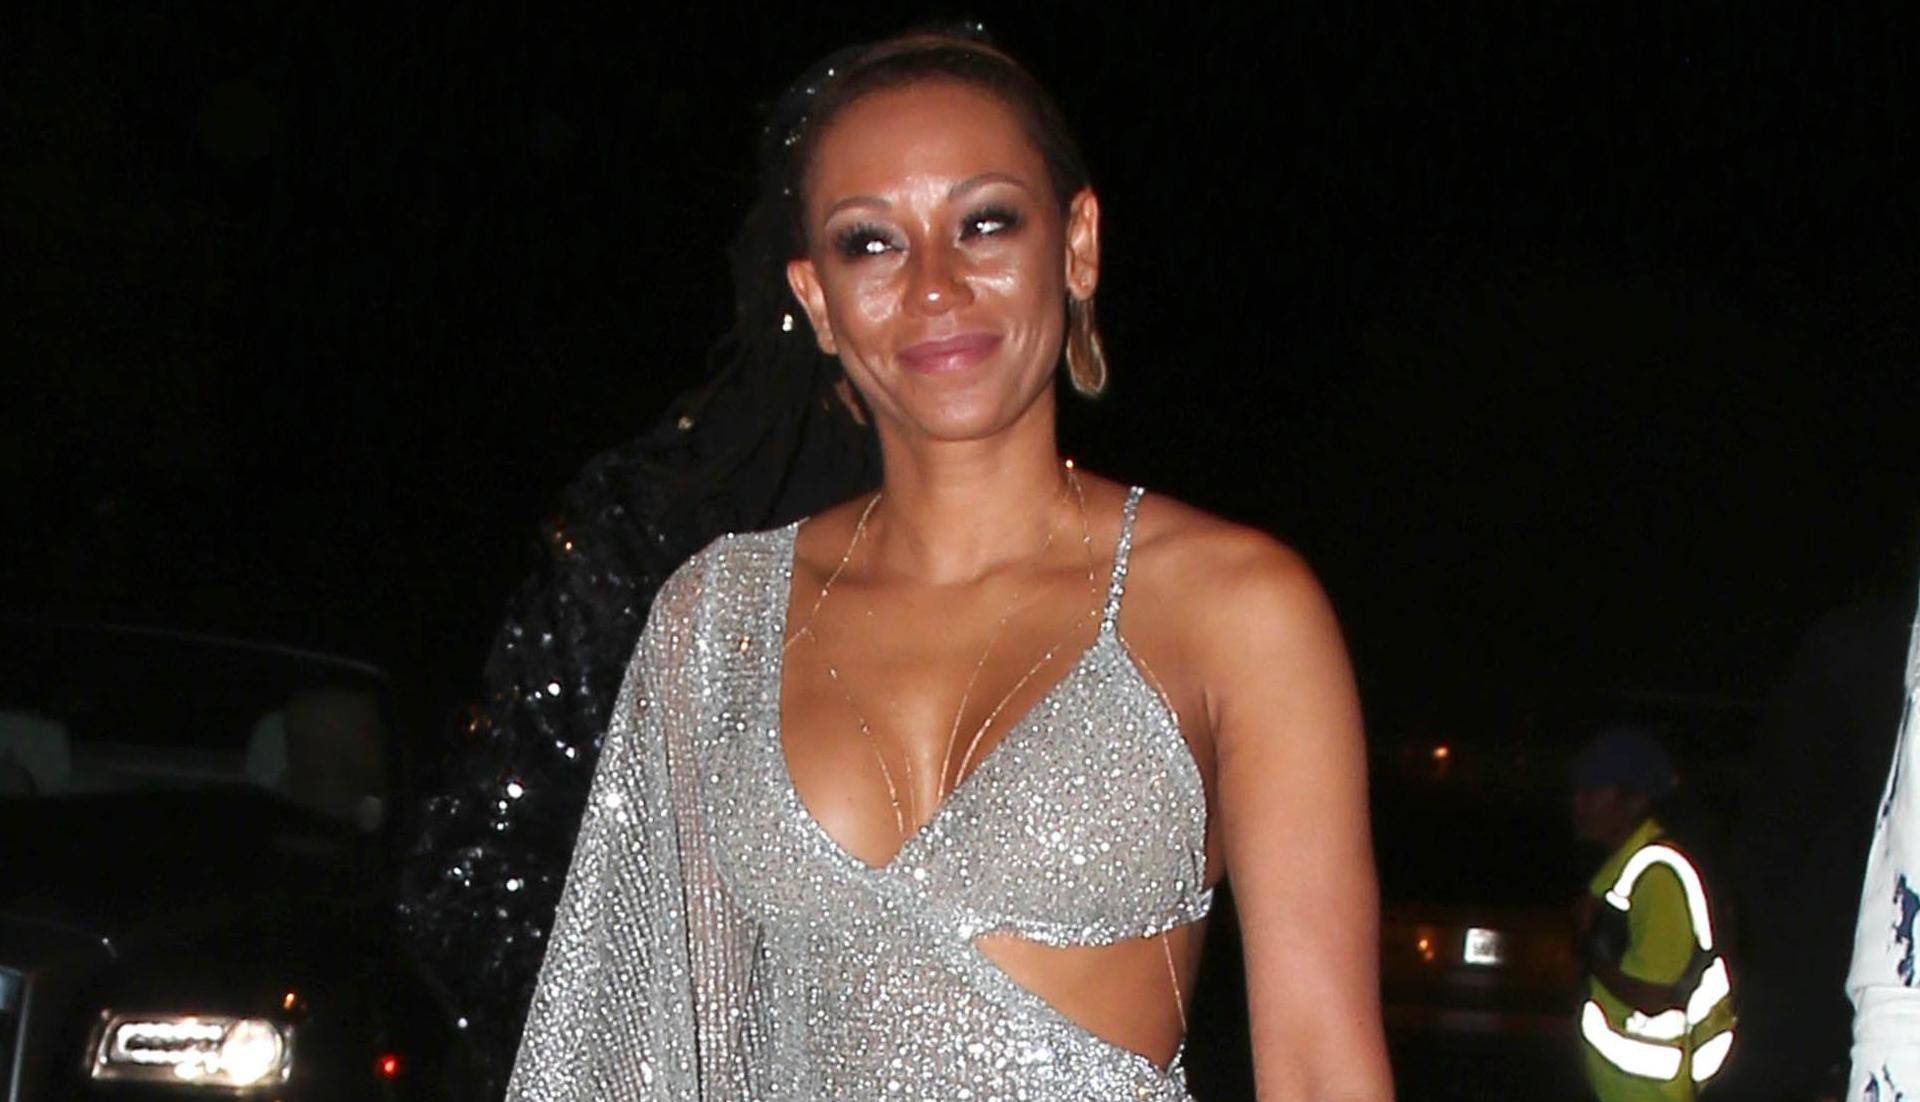 Mel B Looks Flawless While Heading to Mary J. Blige Concert